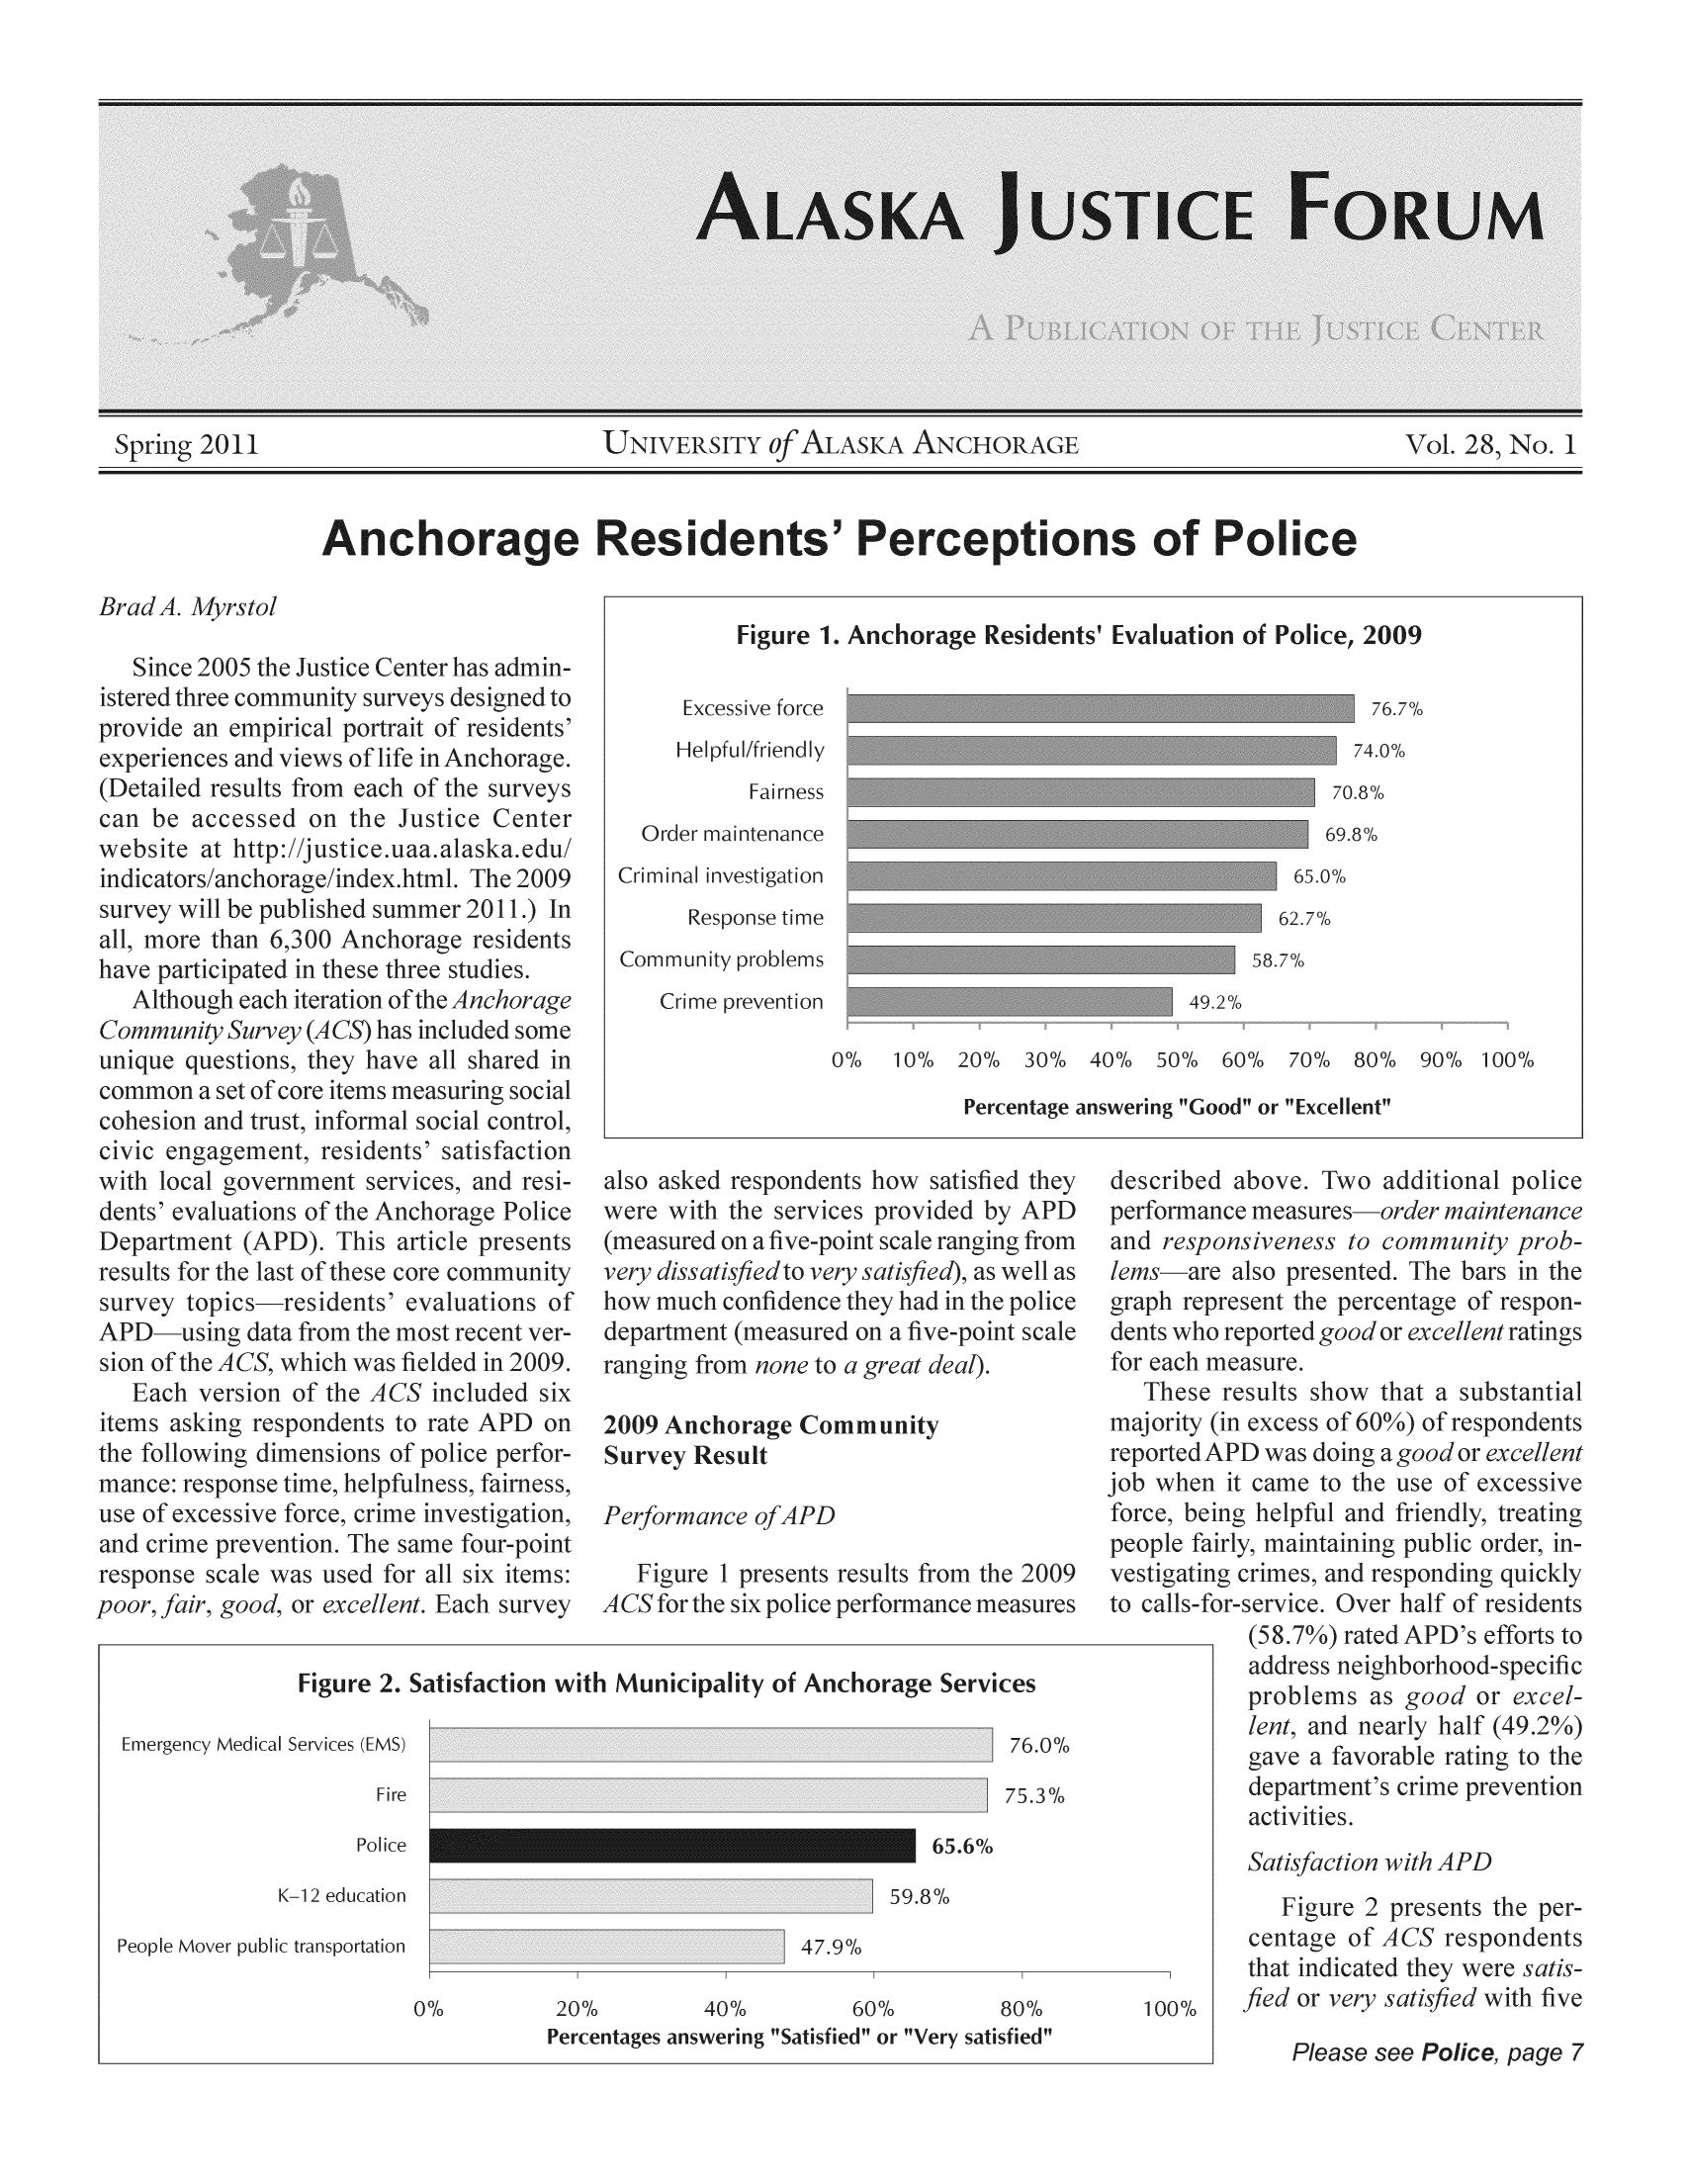 handle is hein.journals/aljufor28 and id is 1 raw text is: UNIVERSITY0fALASKAANCHORAGEAnchorage Residents' Perceptions of PoliceFigure 1. Anchorage Residents' Evaluation of Police,npirical portrait ofid views of life inA)0 or :xcel-rvices providedve-point scale rang-o very satisfied),a[ence they had in tlsured on a five-po7e to a great deal]Communityice perforrAnchorajnanlp Sc-p         rPD  performanfg from  and respowell as  lemsiare,police  graph reprit scale  dents whofor each mreportedAj ob whenforce, beipeople faivestigatinoto calls-fcpr(58.adprotof resp(ss of 60%) of respond,s doing a good or excee to the use of exces)ful and friendly, trea,ntaining public orders, and responding quiice. Over half of resid7%) rated APD's effor-ess neighborhood- spe,)lems as good or exand nearly half (49.ia favorable rating tcirment's crime preyerpee 2 presents t]of ACS respccared they werery satisfied wse see Police,SprinSince 2005provexpe(Dettp:hopupath.0009Immhorathreeof th,atioitcs)eyIiterrrfoniring socialS' satisfaprLs fcfy--U:e folance:;e of,d crisport:Dpicsinge Aver,cingxinjspoe prdata fr('S, whiiion ofrespondimenrse tim,ive forcofer-A9lice perf5s , faimcestigatiifour-podeparrangit2009SumA CSilts to ras of PClpfulnerime in4e sam,I for alfrom nnehorag, ResultFigure 2. SiFigure I presi'S or the six ptunicipalitv o